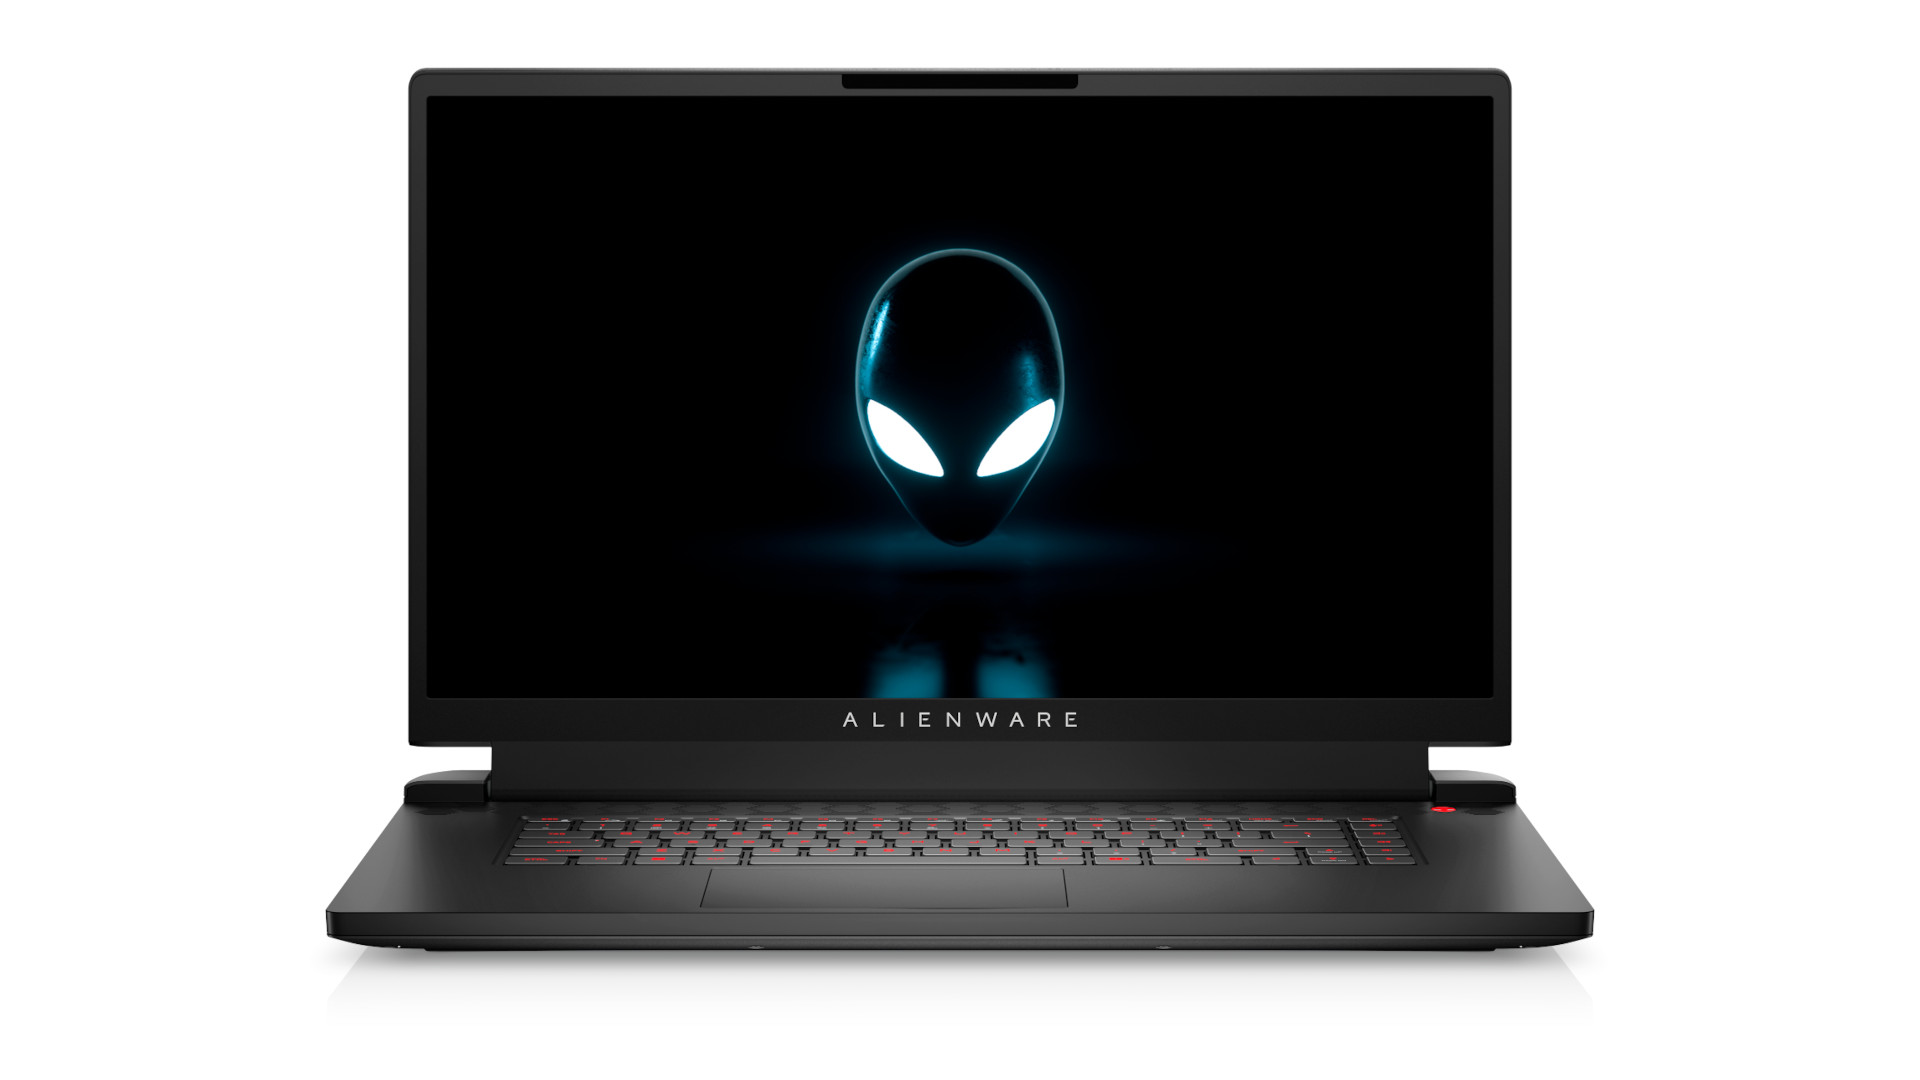 AMD's best gaming laptop is the Alienware M17 R5.